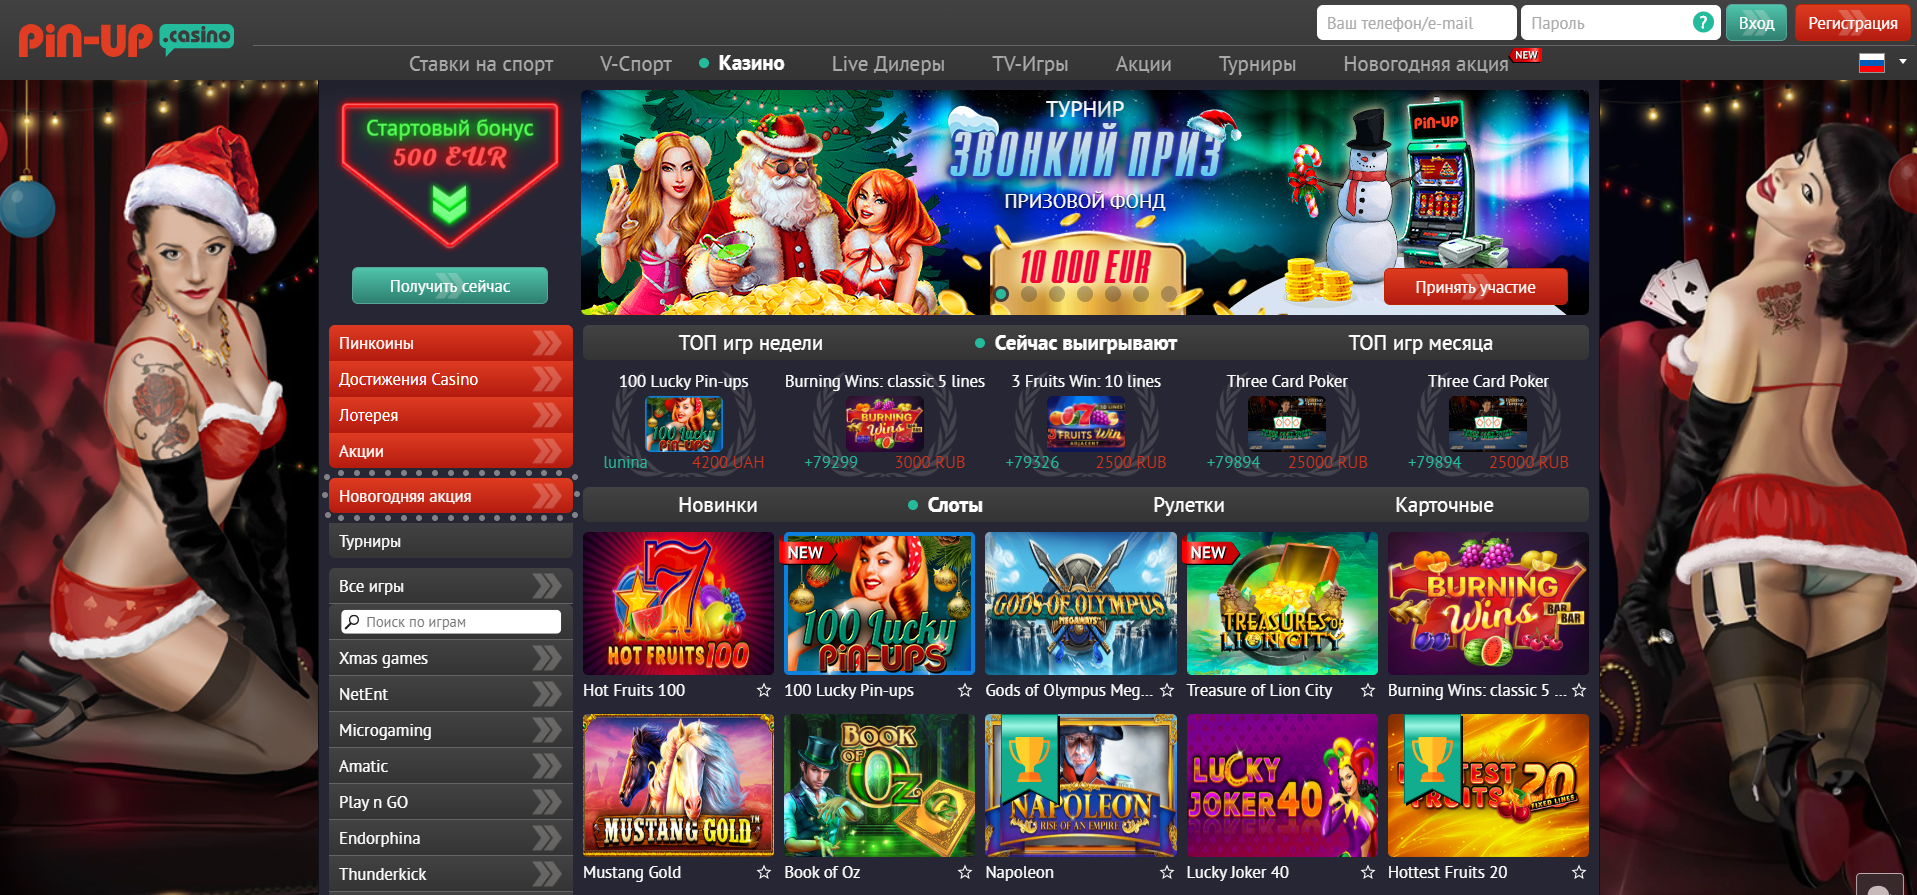 pin up win casino pinup site online